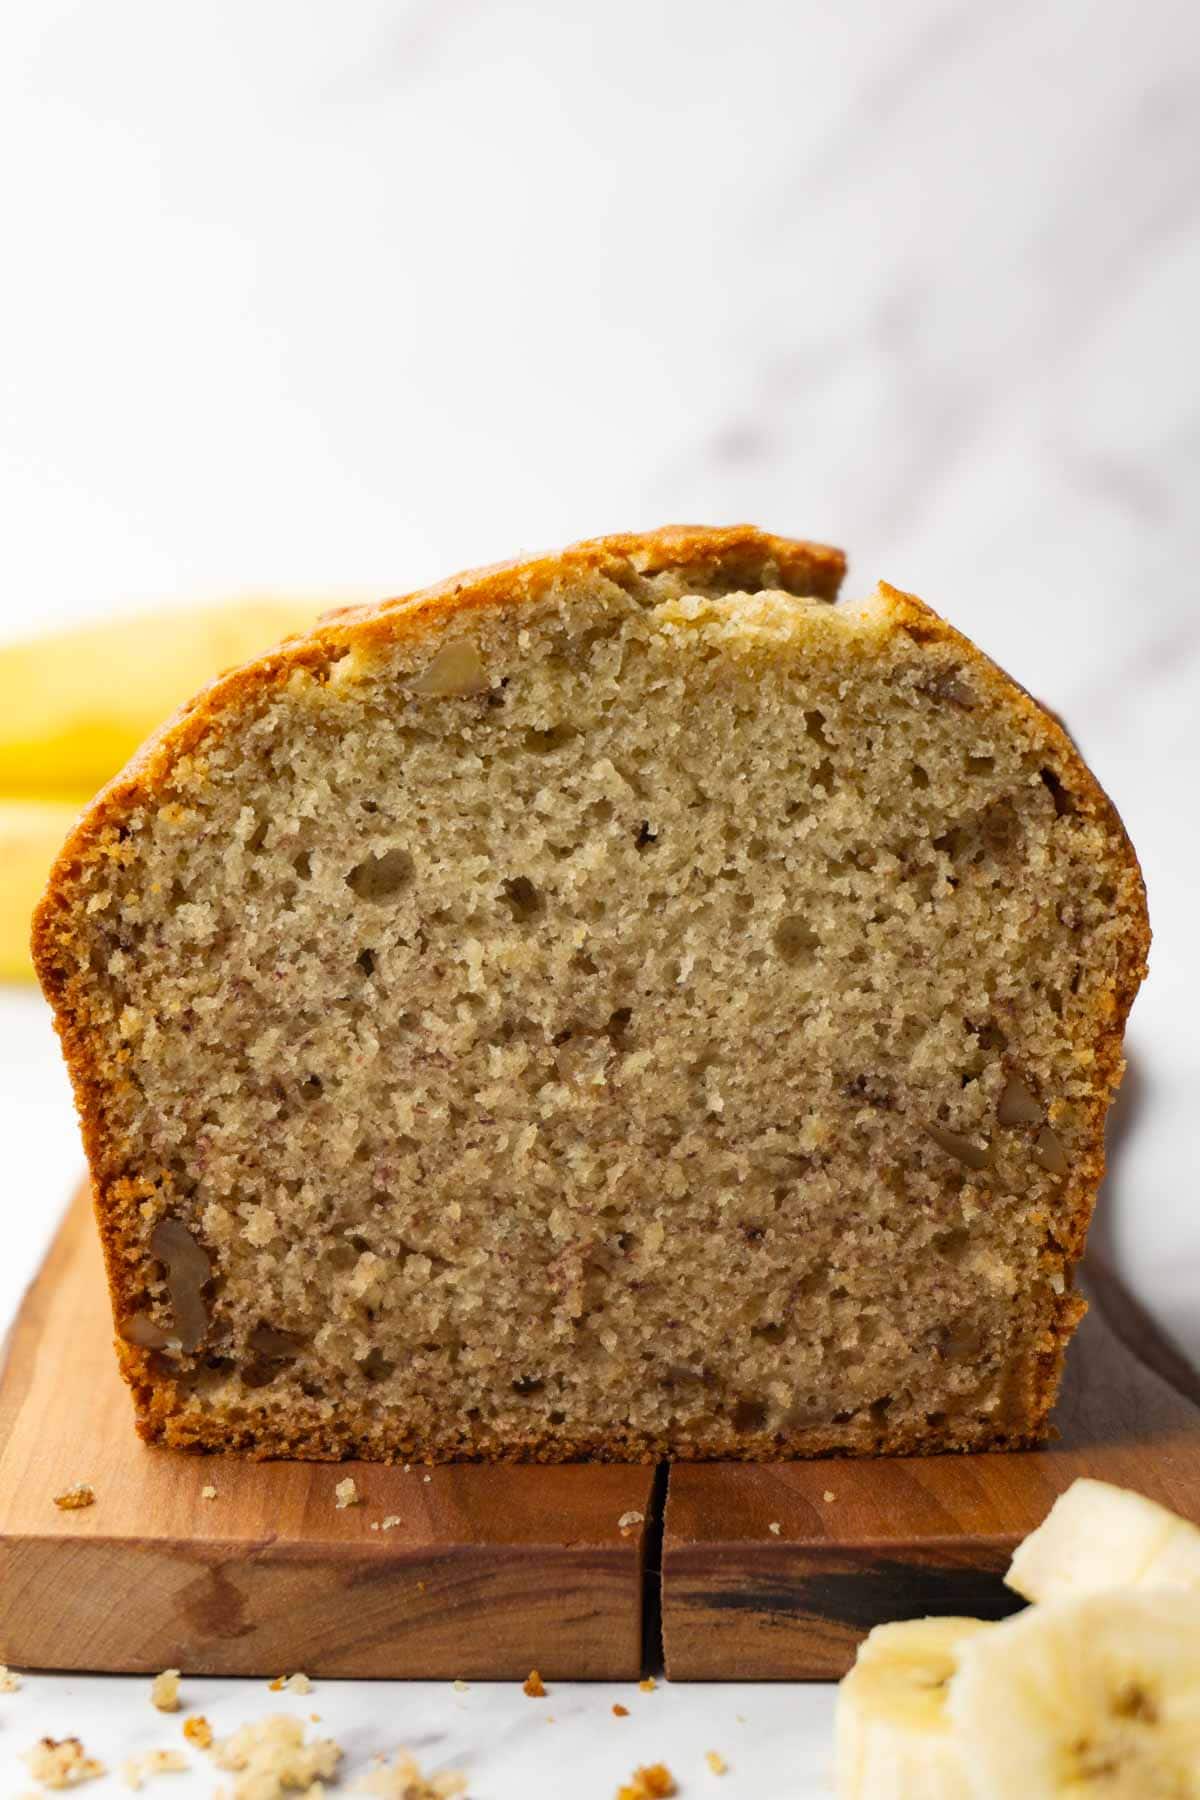 A loaf of banana bread with walnuts on a wooden cutting board; several slices were taken.